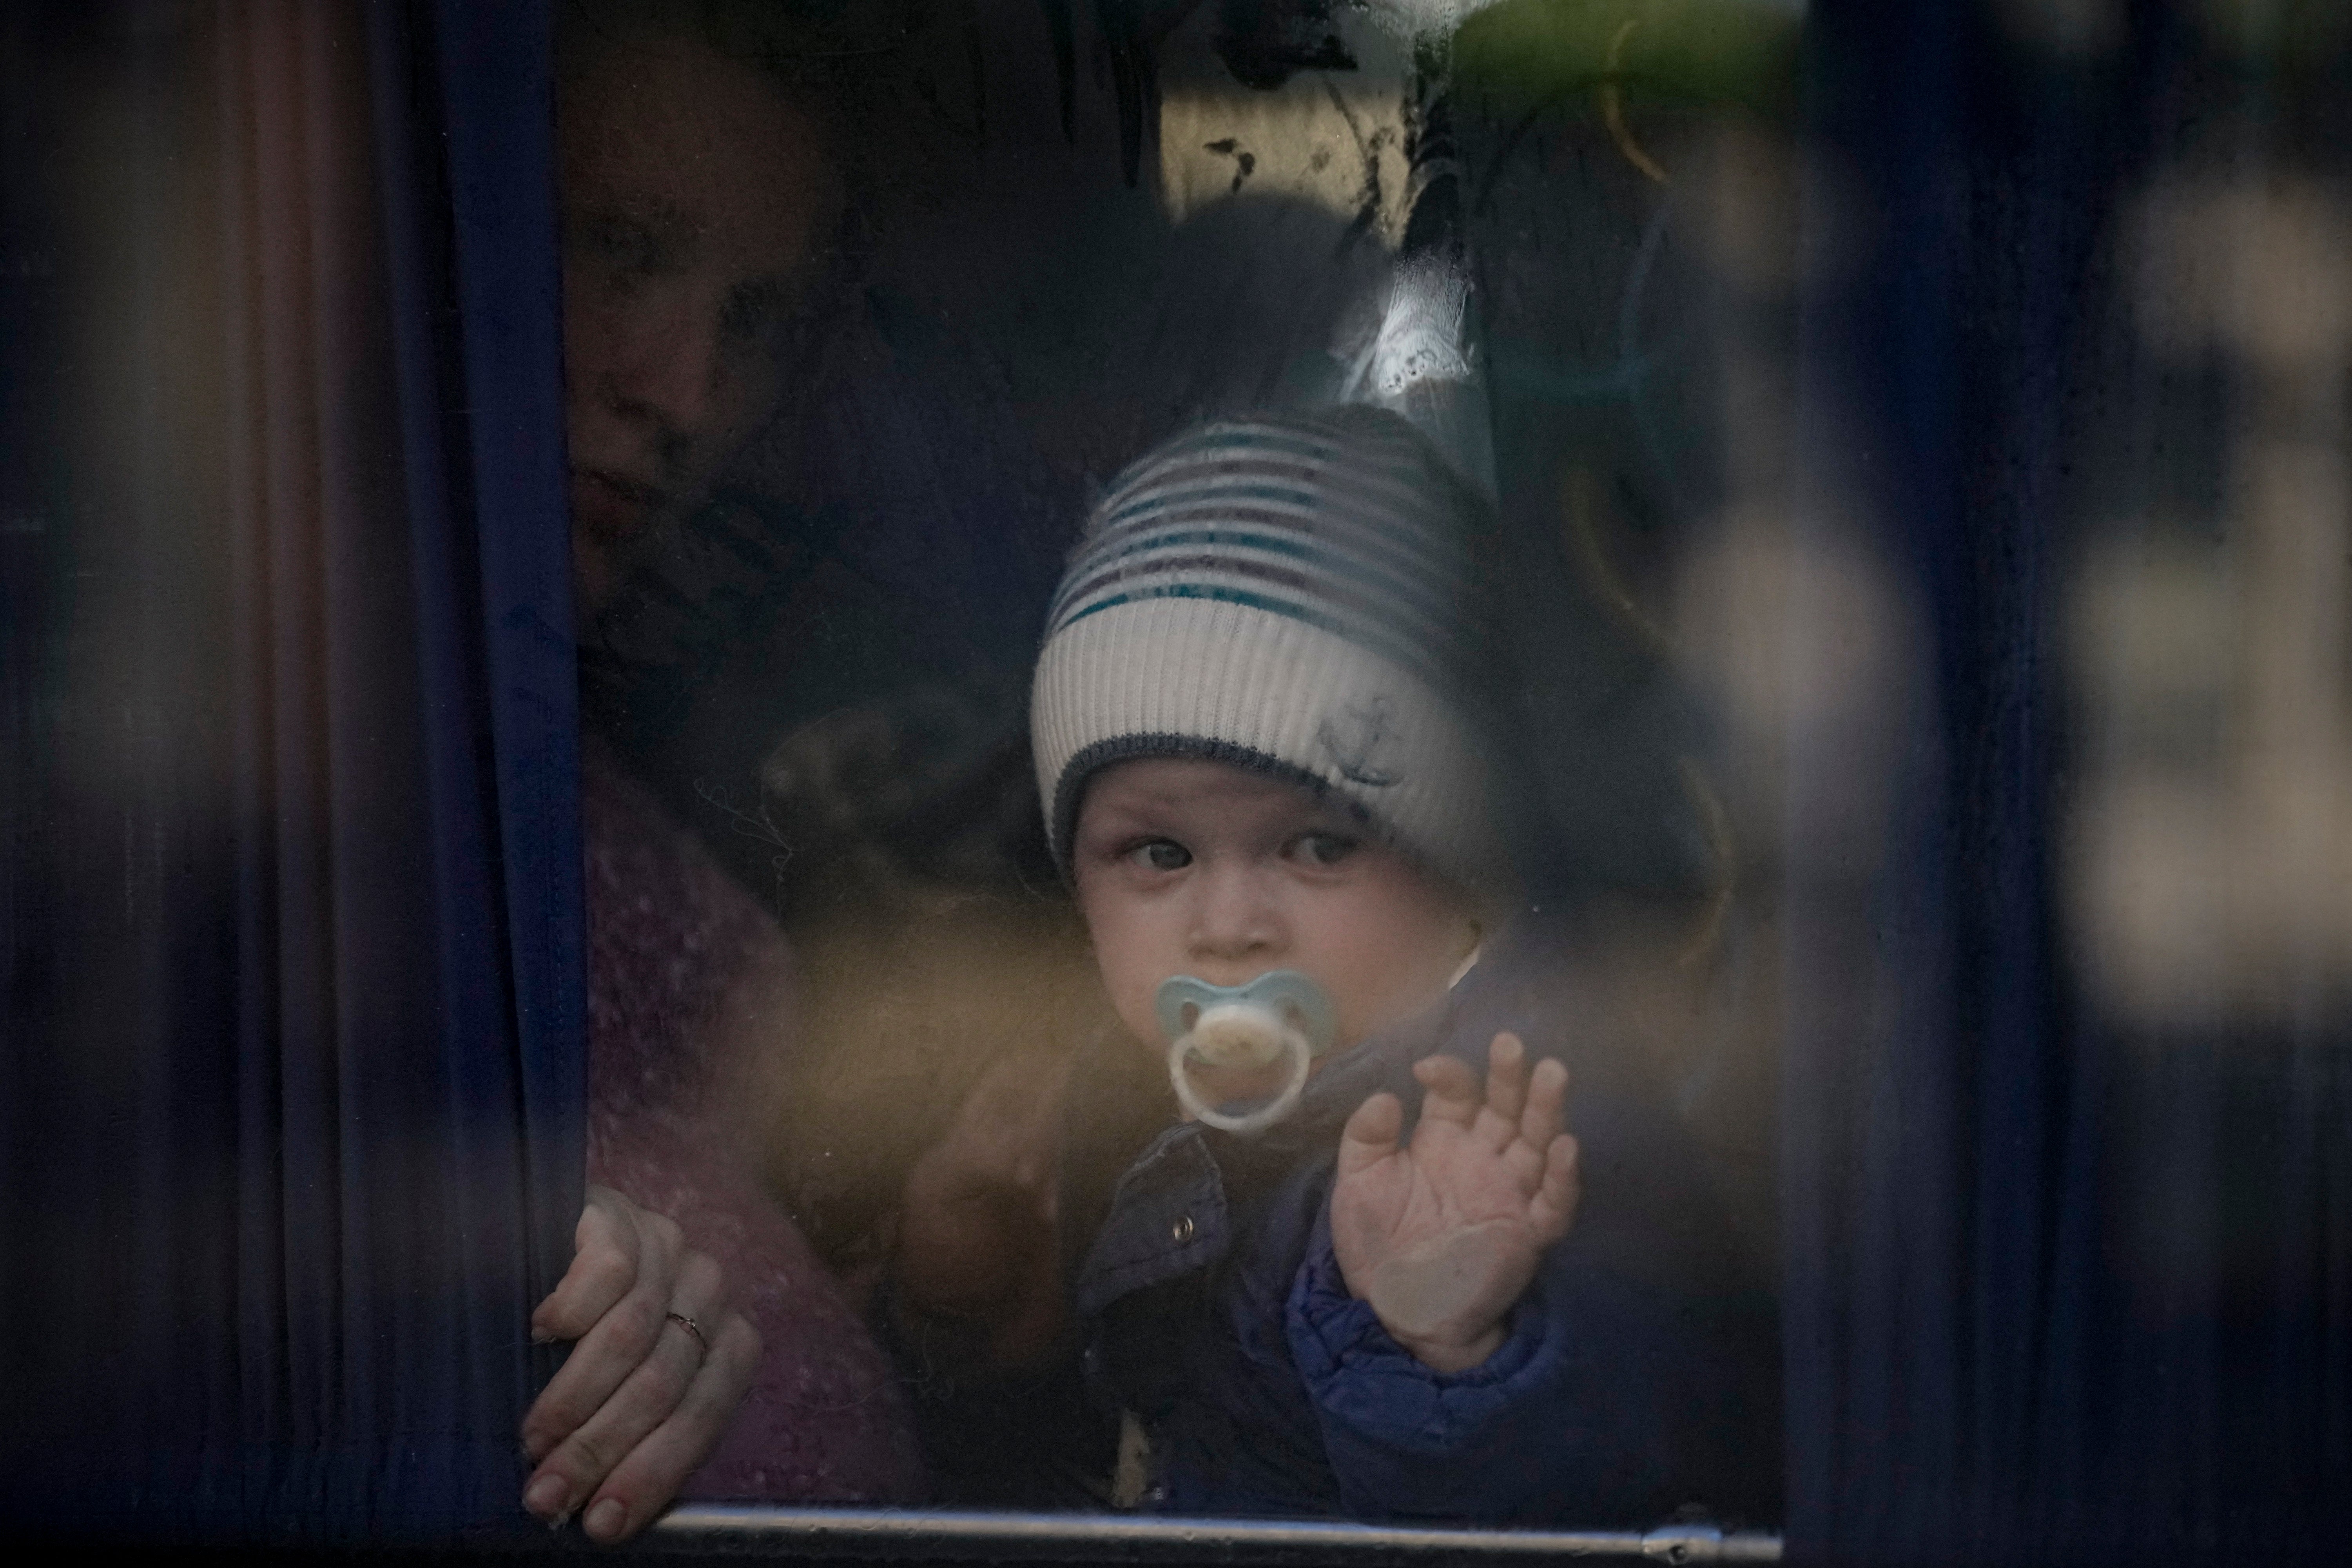 A refugee holds a baby while waiting on a bus for Ukrainian police to check papers and belongings in Brovary (Vadim Ghirda/AP)